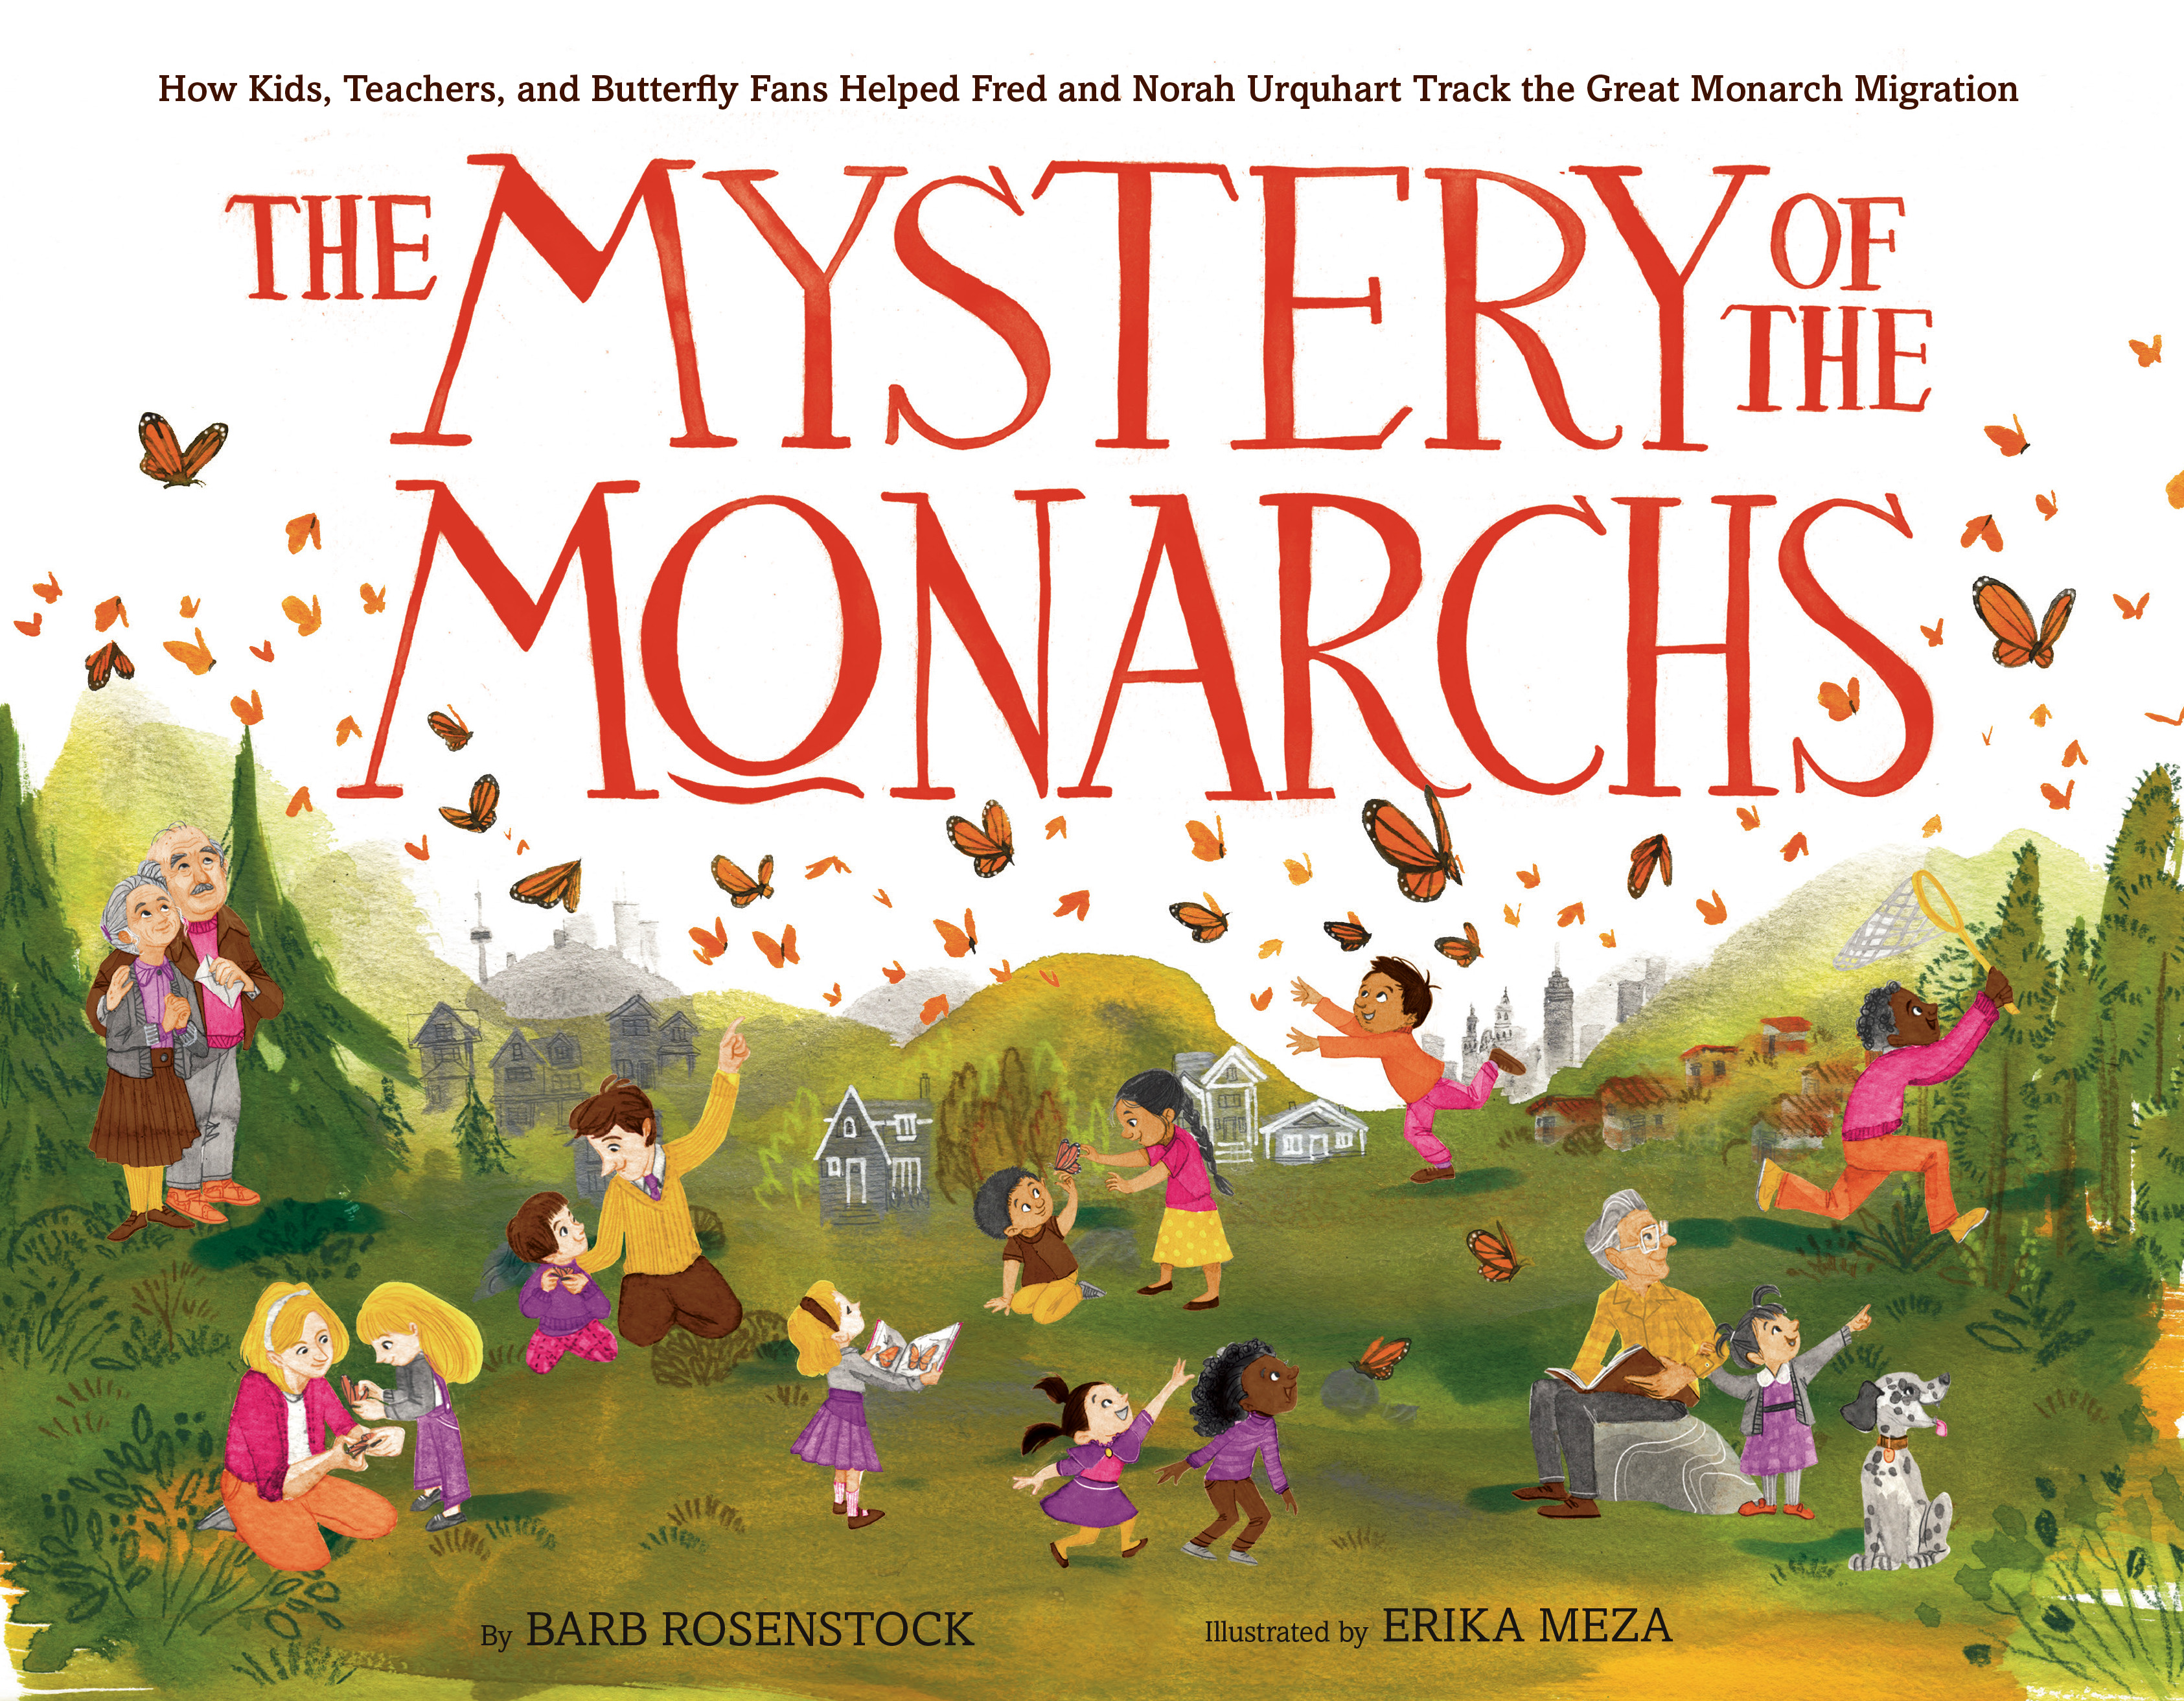 The Mystery of the Monarchs : How Kids, Teachers, and Butterfly Fans Helped Fred and Norah Urquhart Track the Great Monarch Migration | Rosenstock, Barb